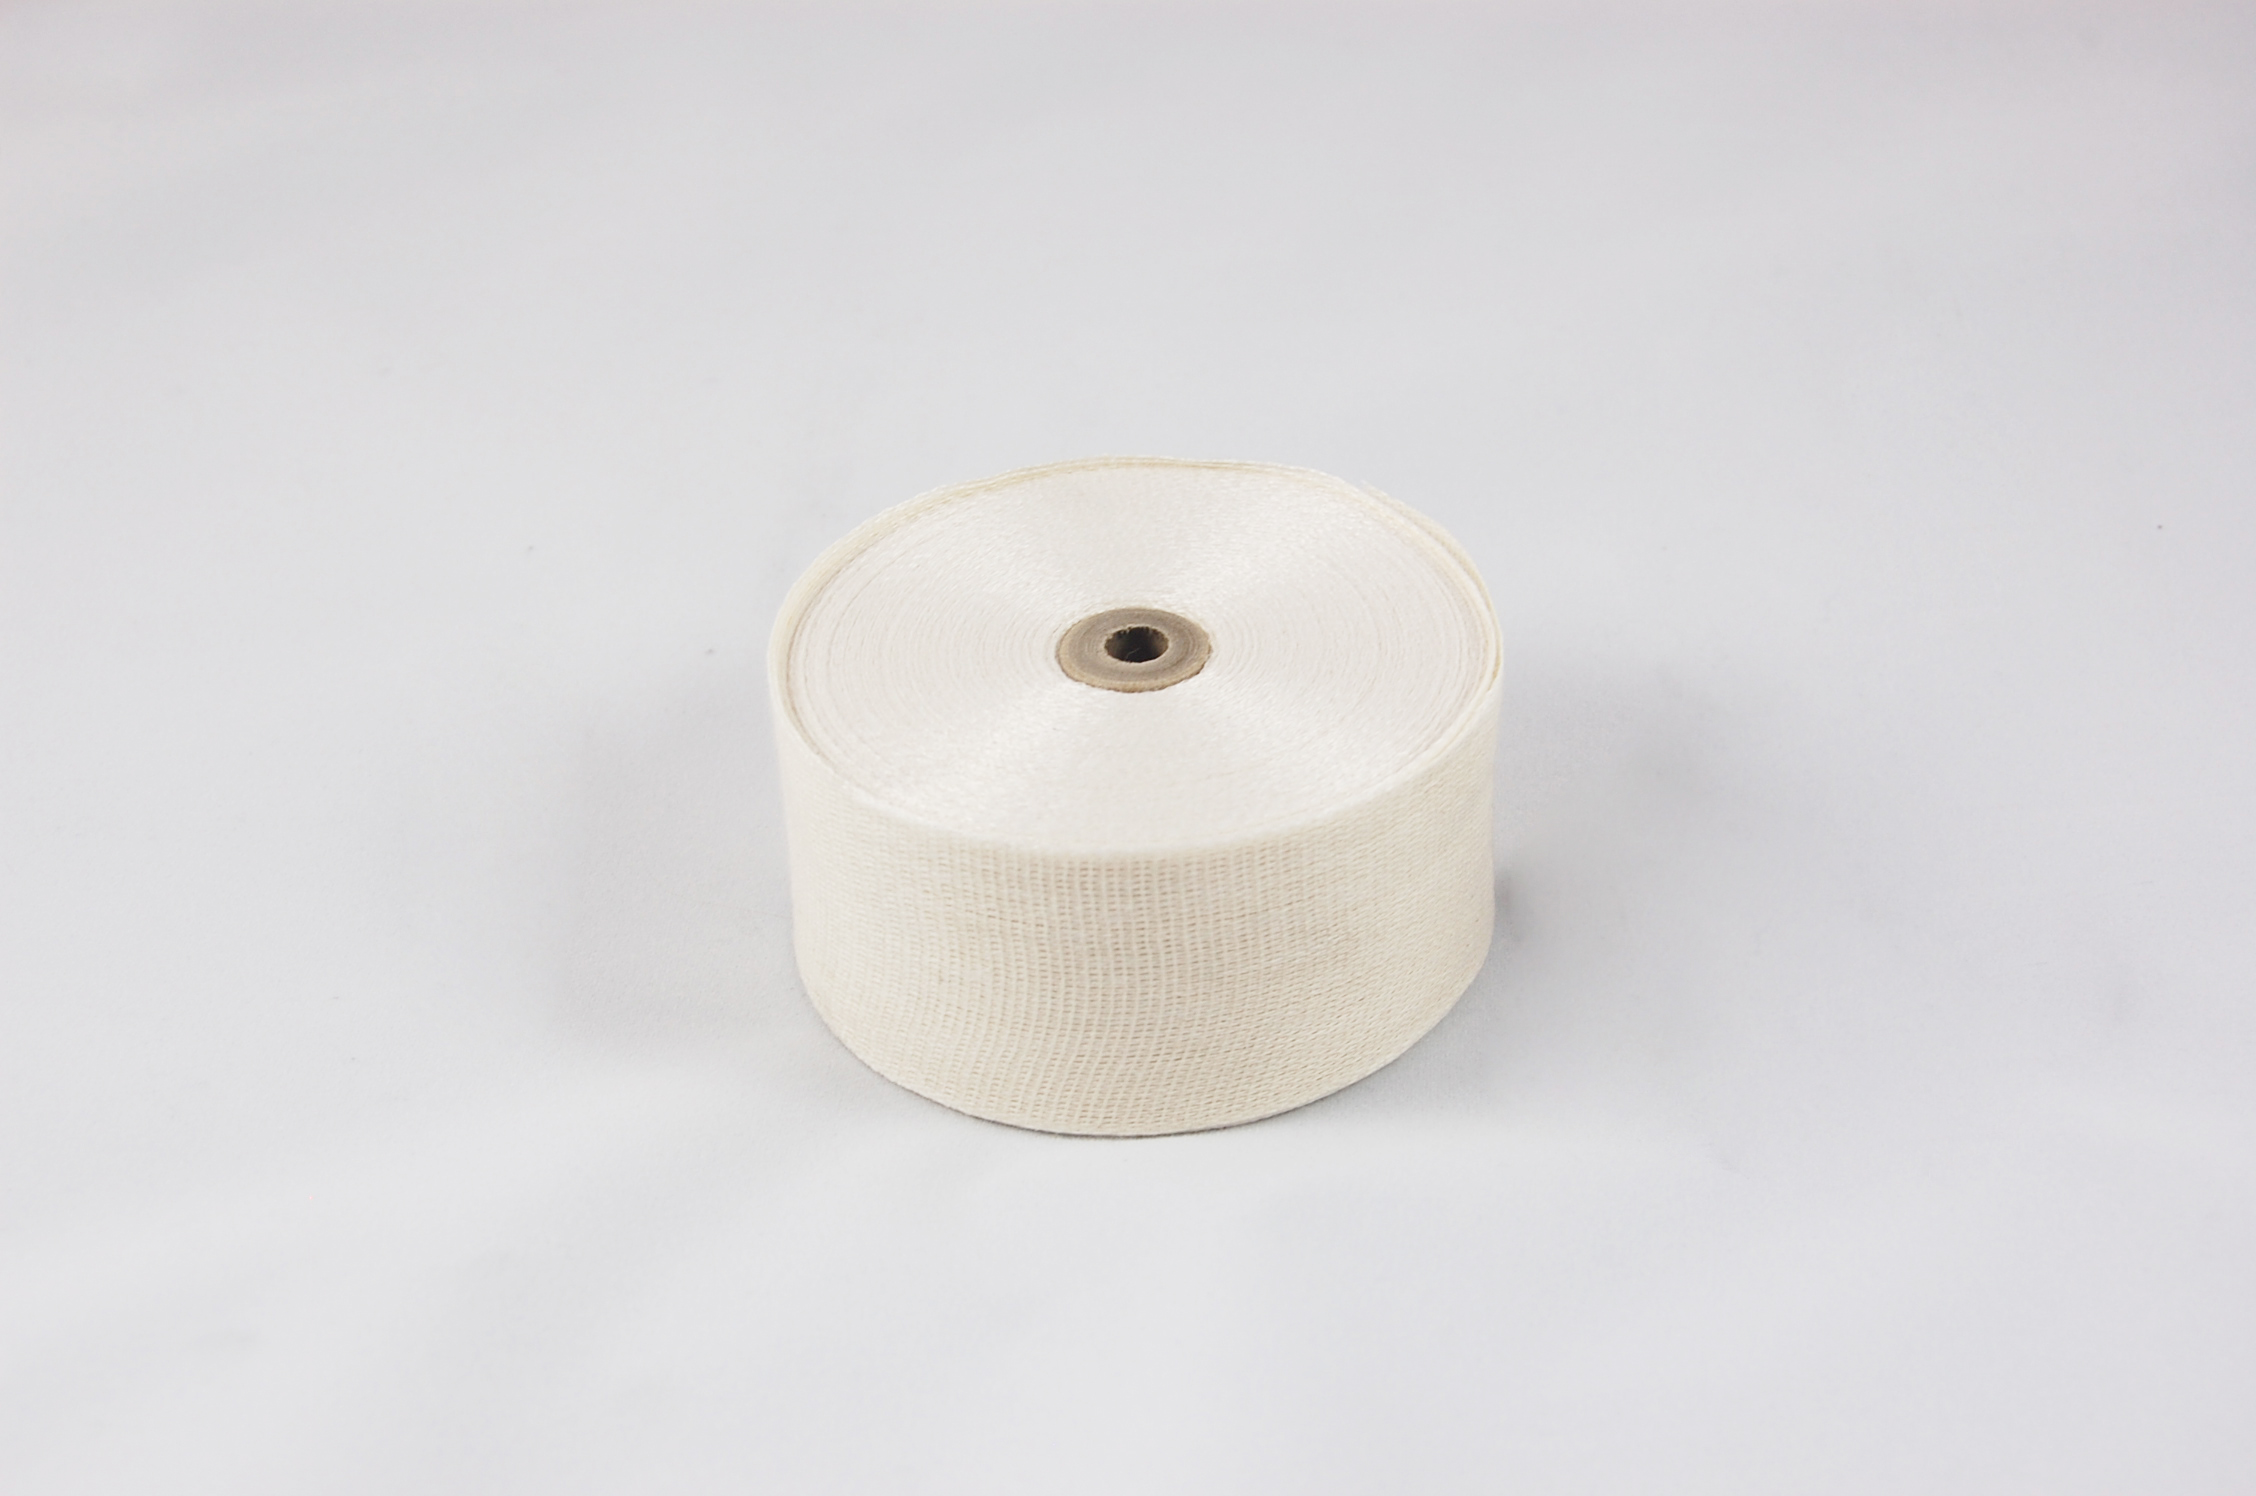 1-1/4" 92410 .020" Woven Cotton Binding Tape 105°C, natural, 1-1/4" wide x  36 YD roll